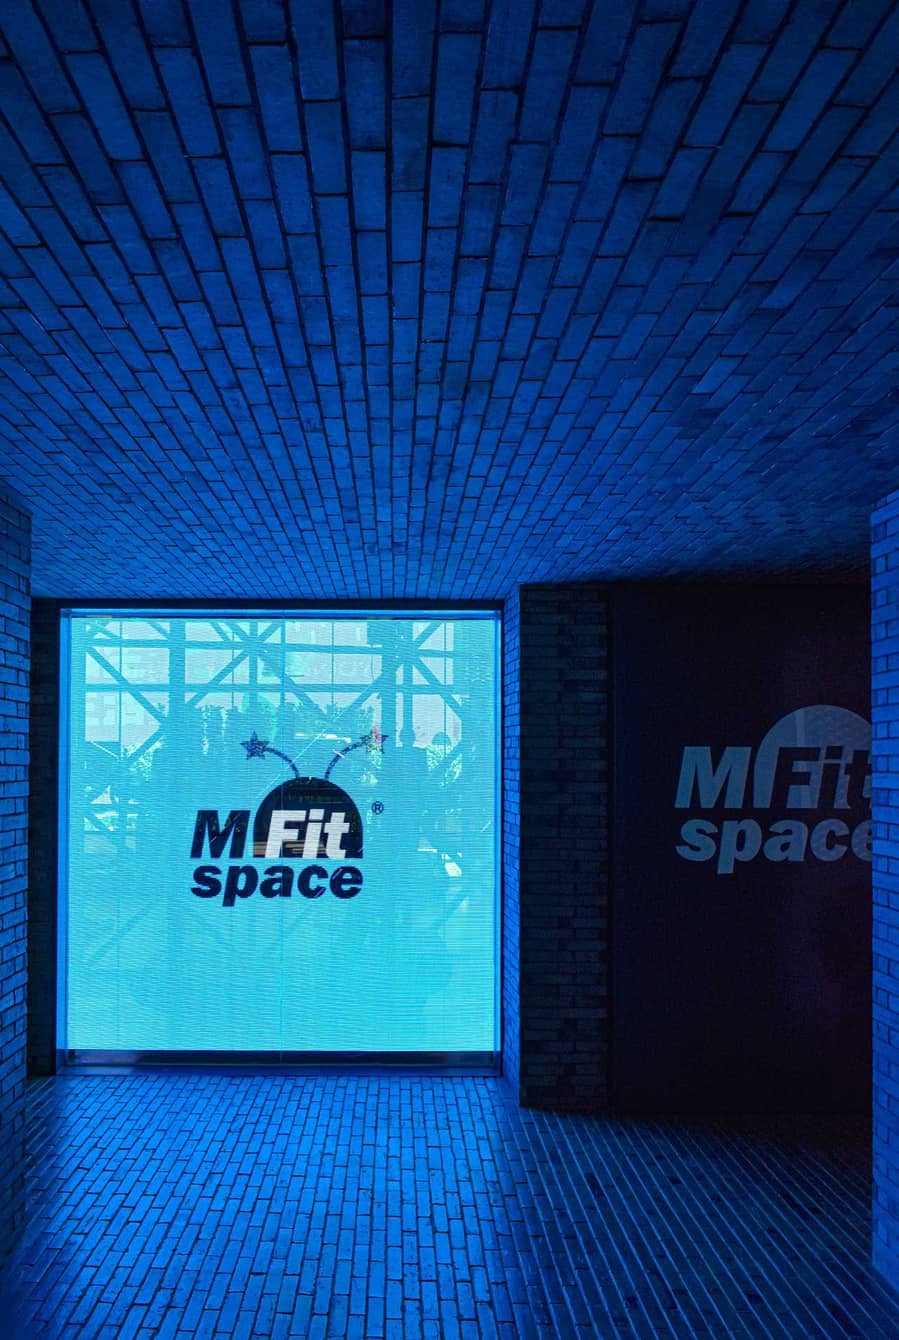 Rich shades of blue and red give MFIT SPACE 01 an out-of-this-world aesthetic.